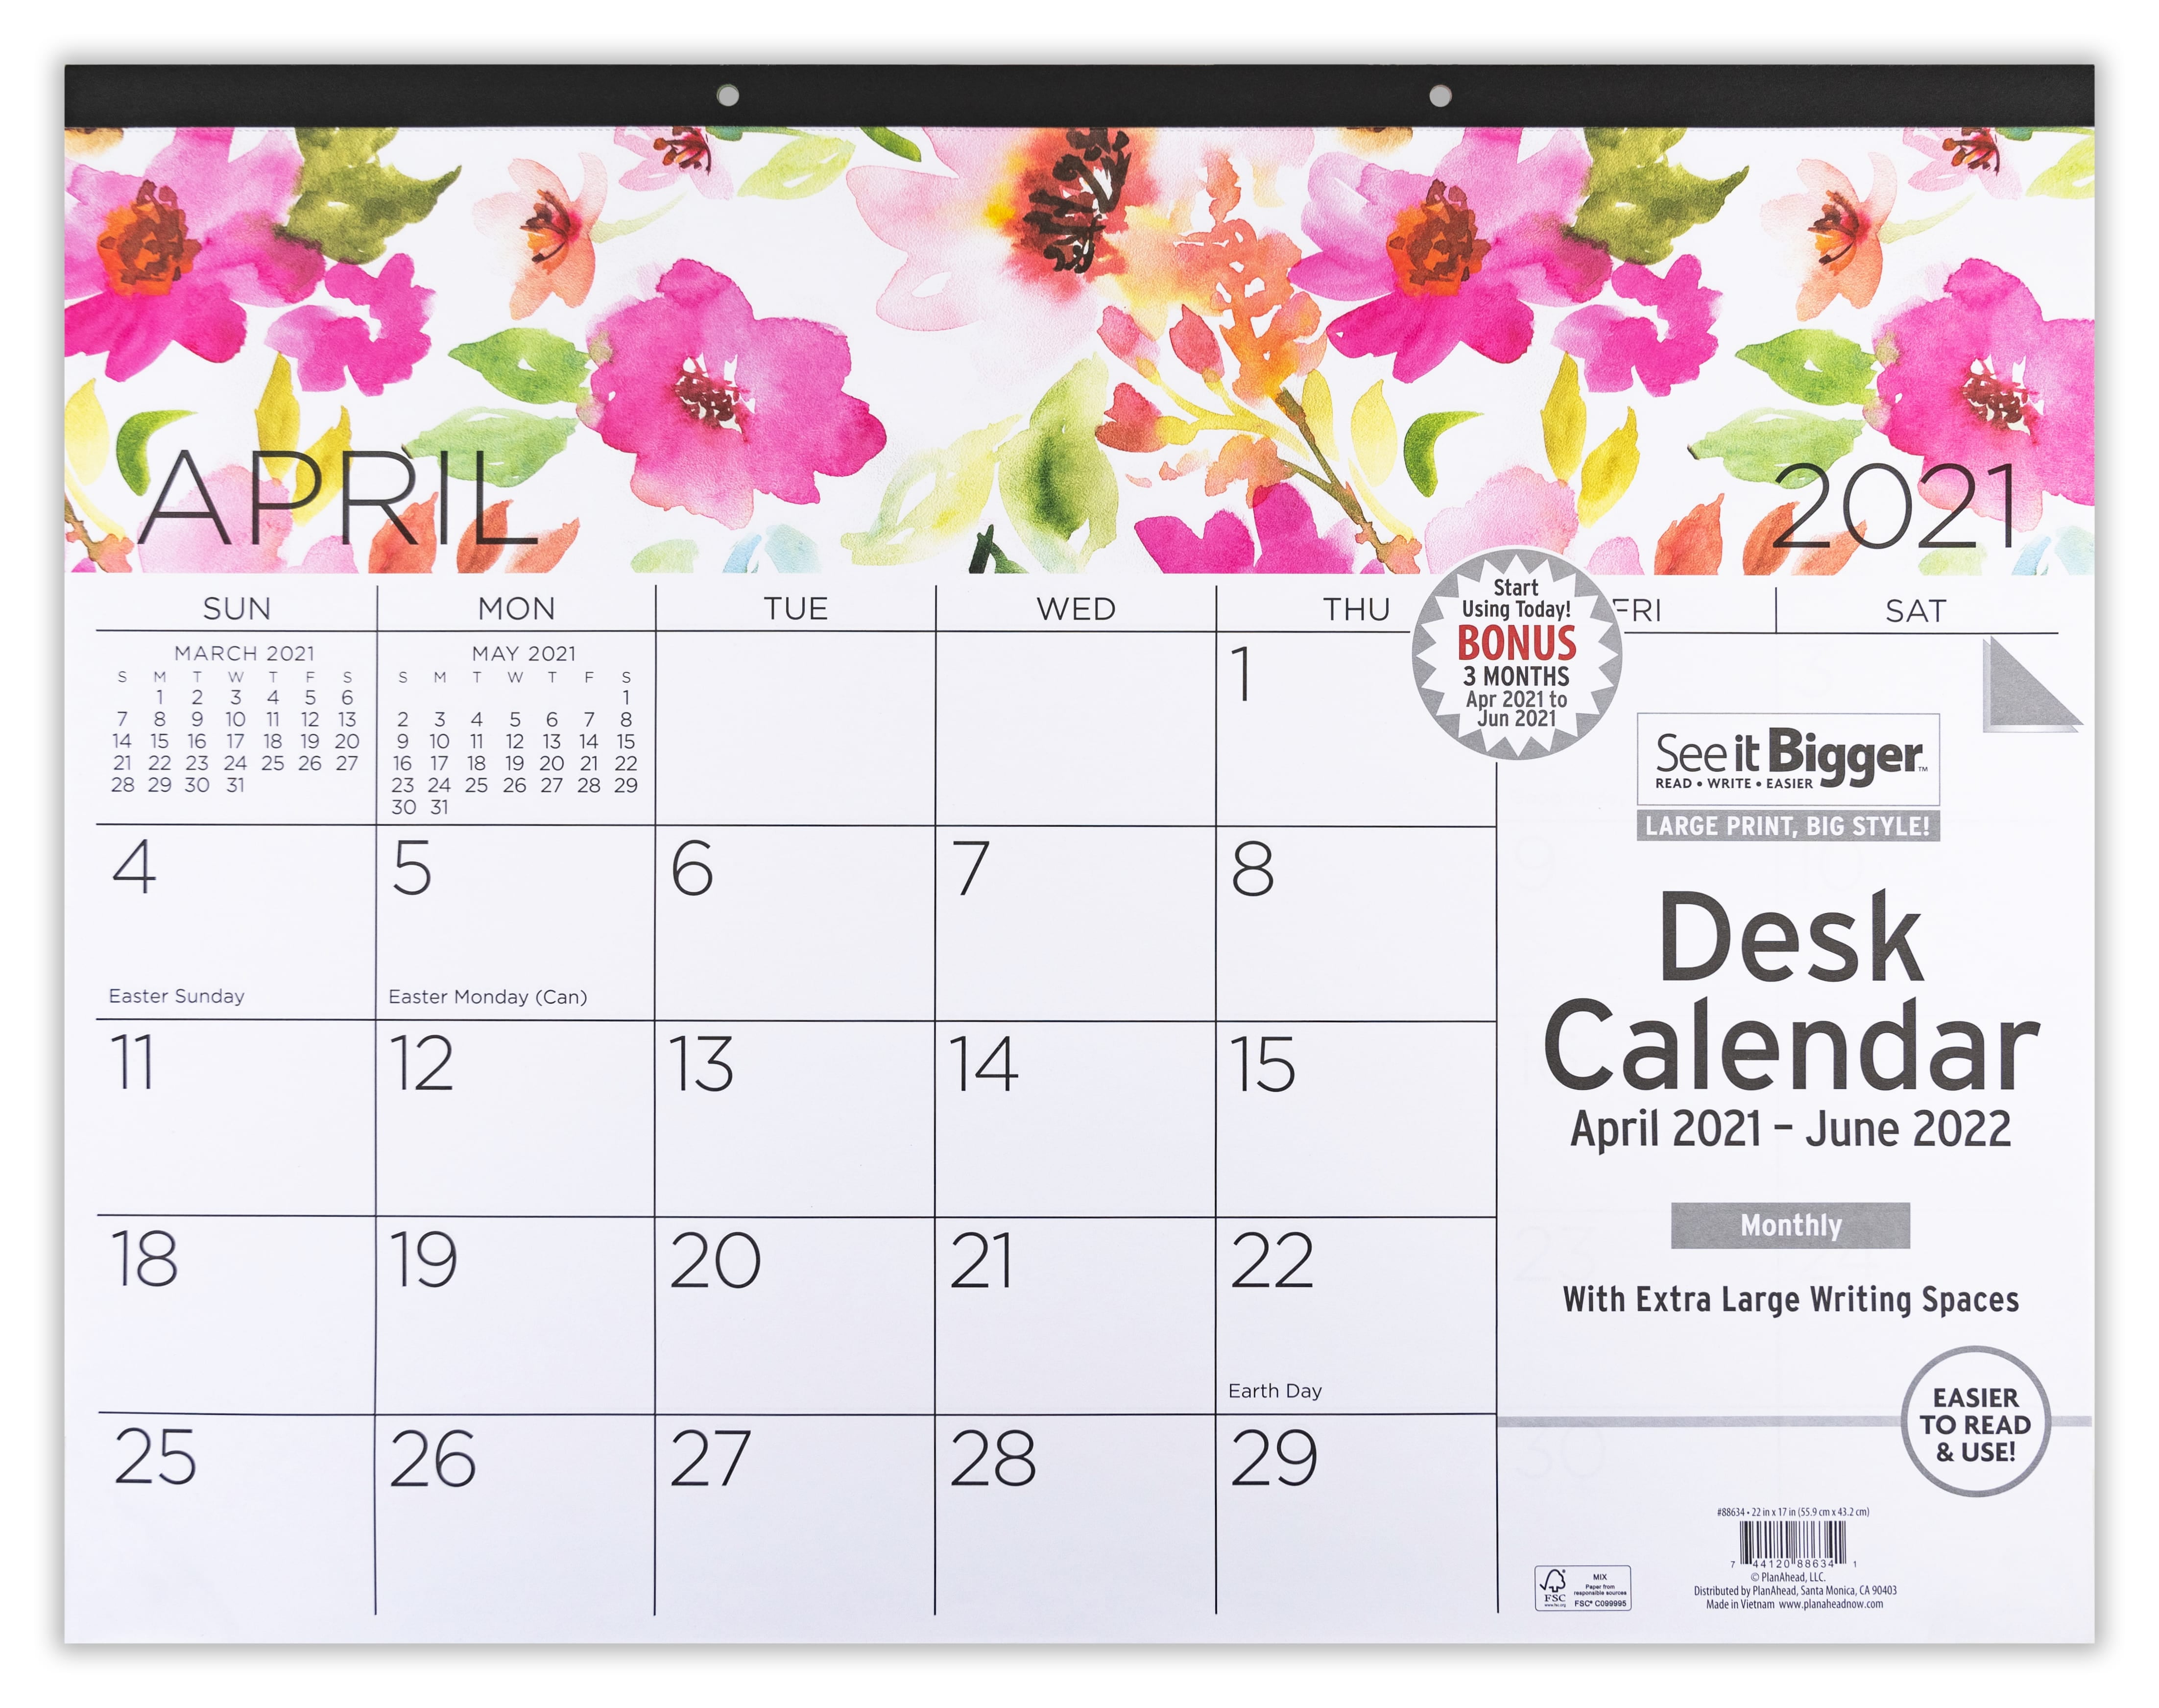 2020 Month to View Desk Calendar Home Office Table Work Planner PURPLE FLOWERS 